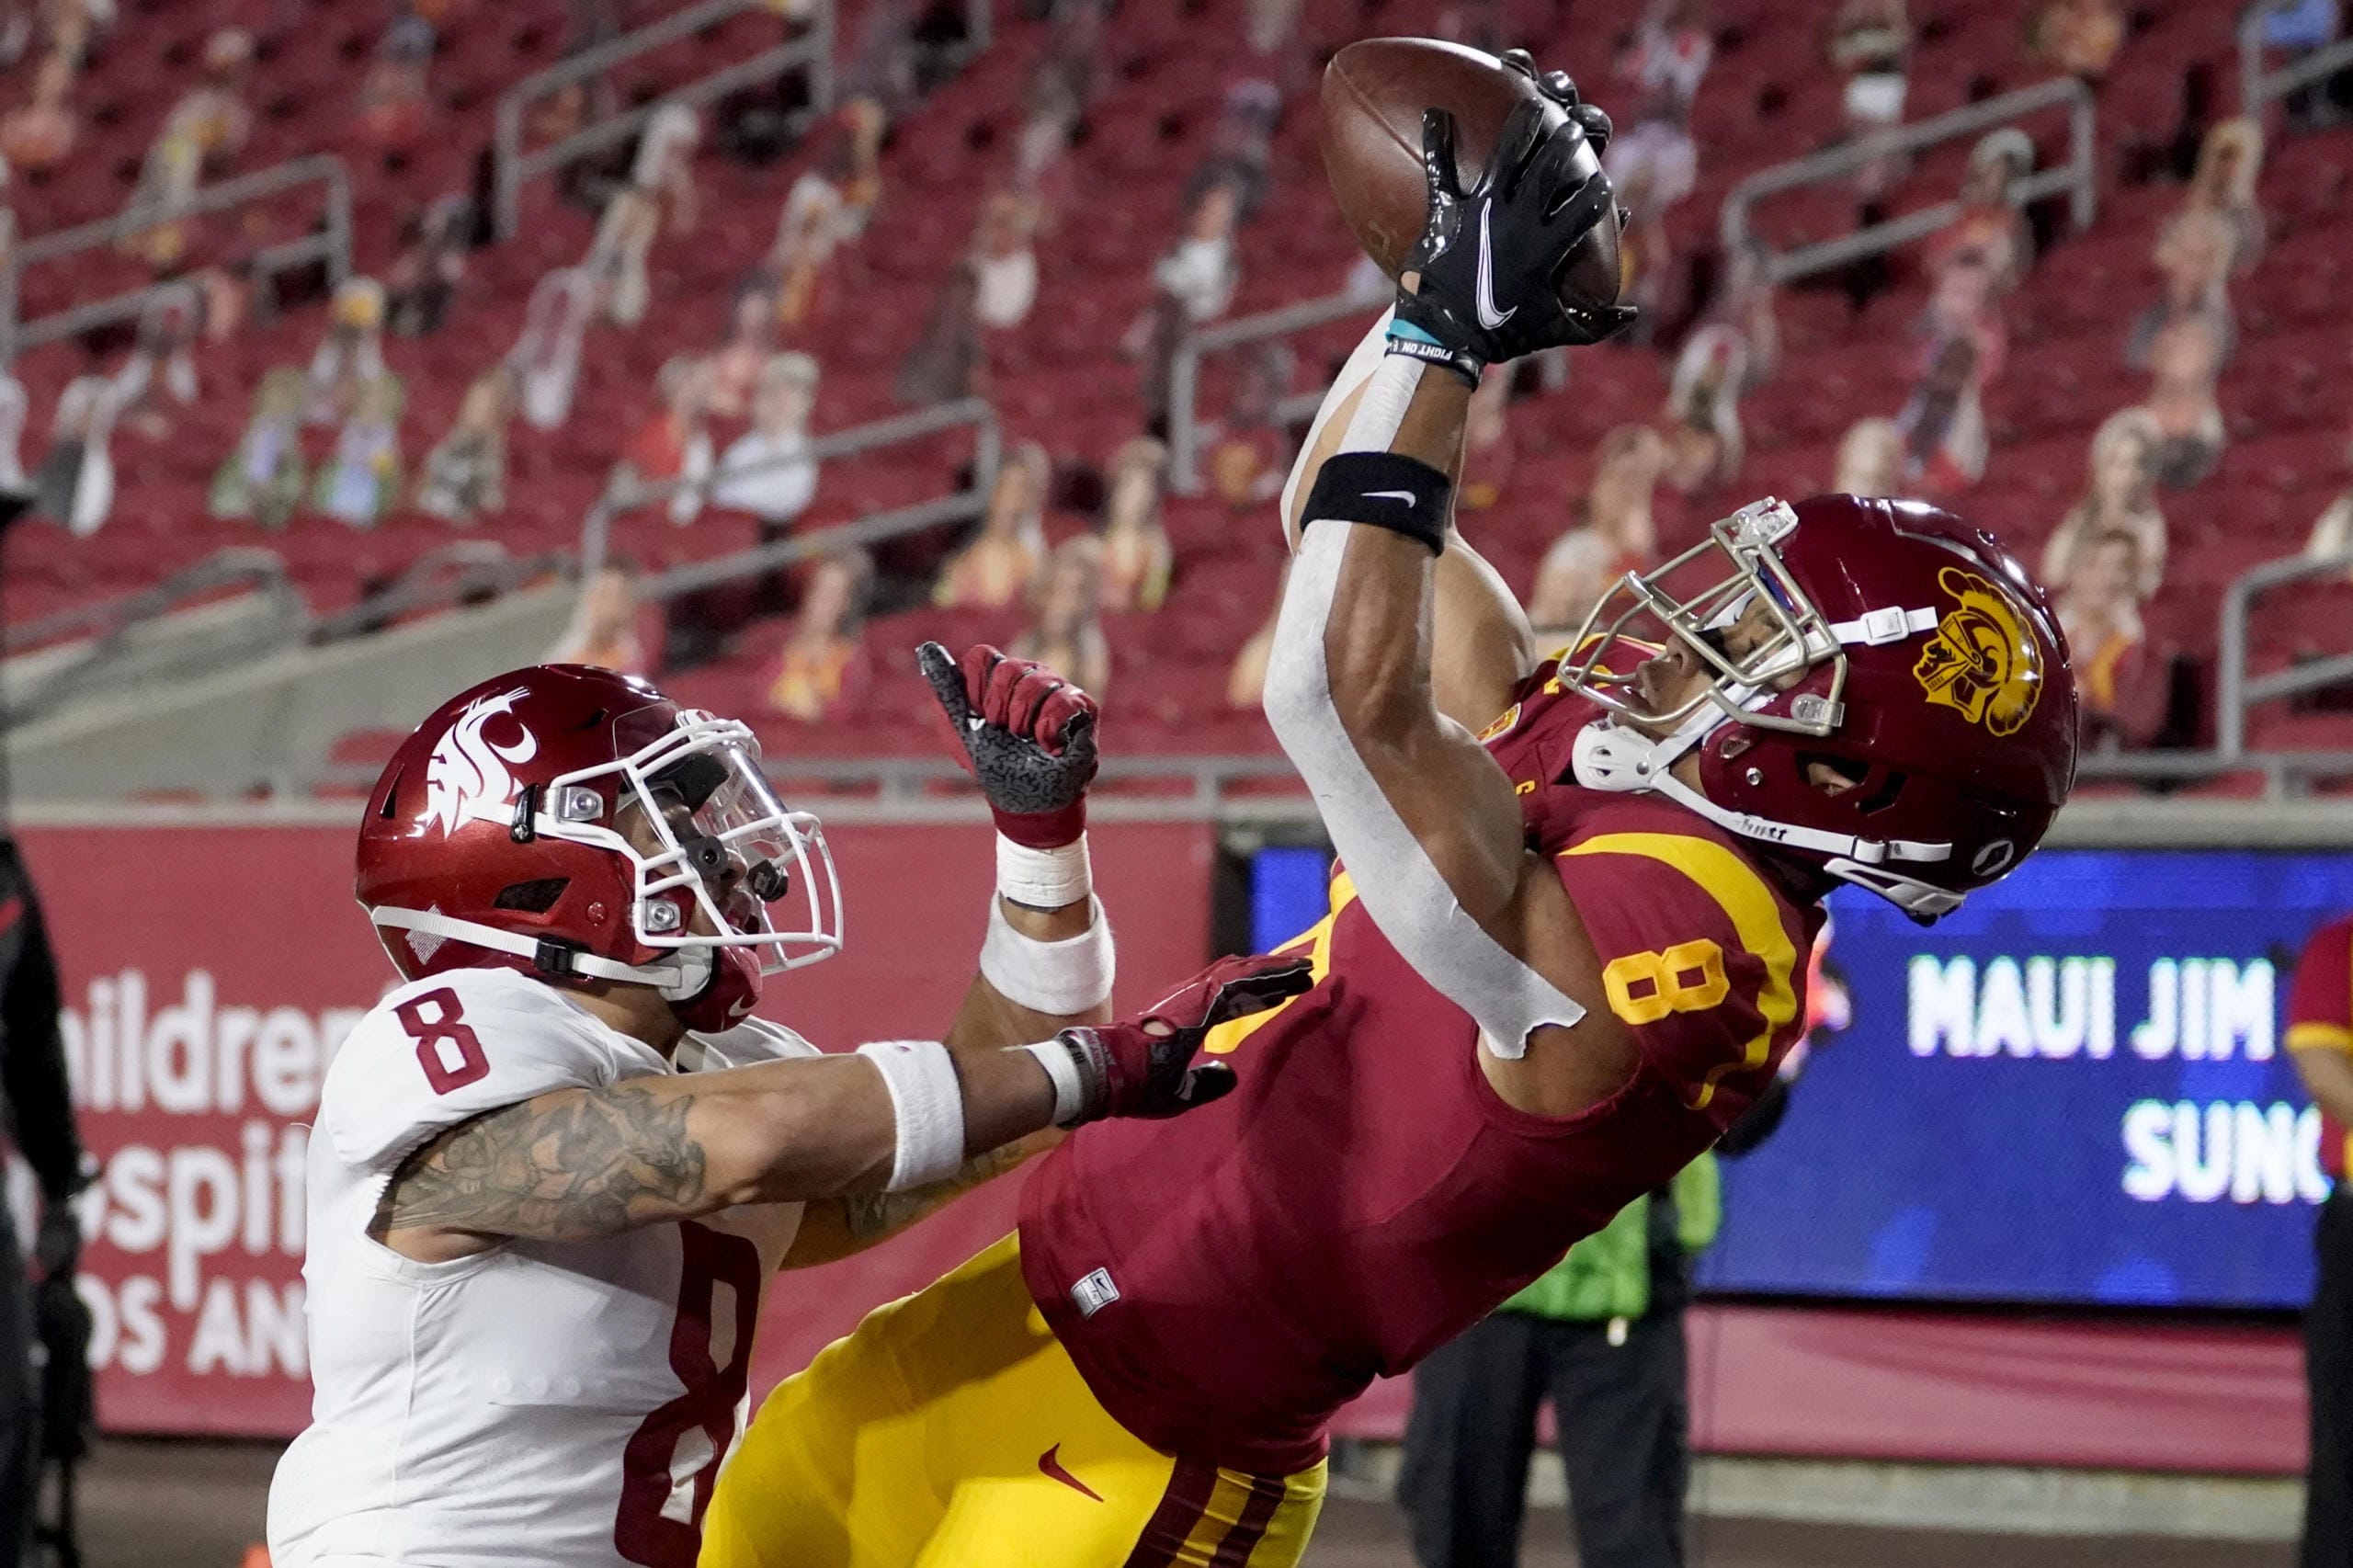 Southern California wide receiver Amon-Ra St. Brown, right, catches a touchdown over Washington State defensive back Armani Marsh during the first half of an NCAA college football game in Los Angeles, Sunday, Dec. 6, 2020.